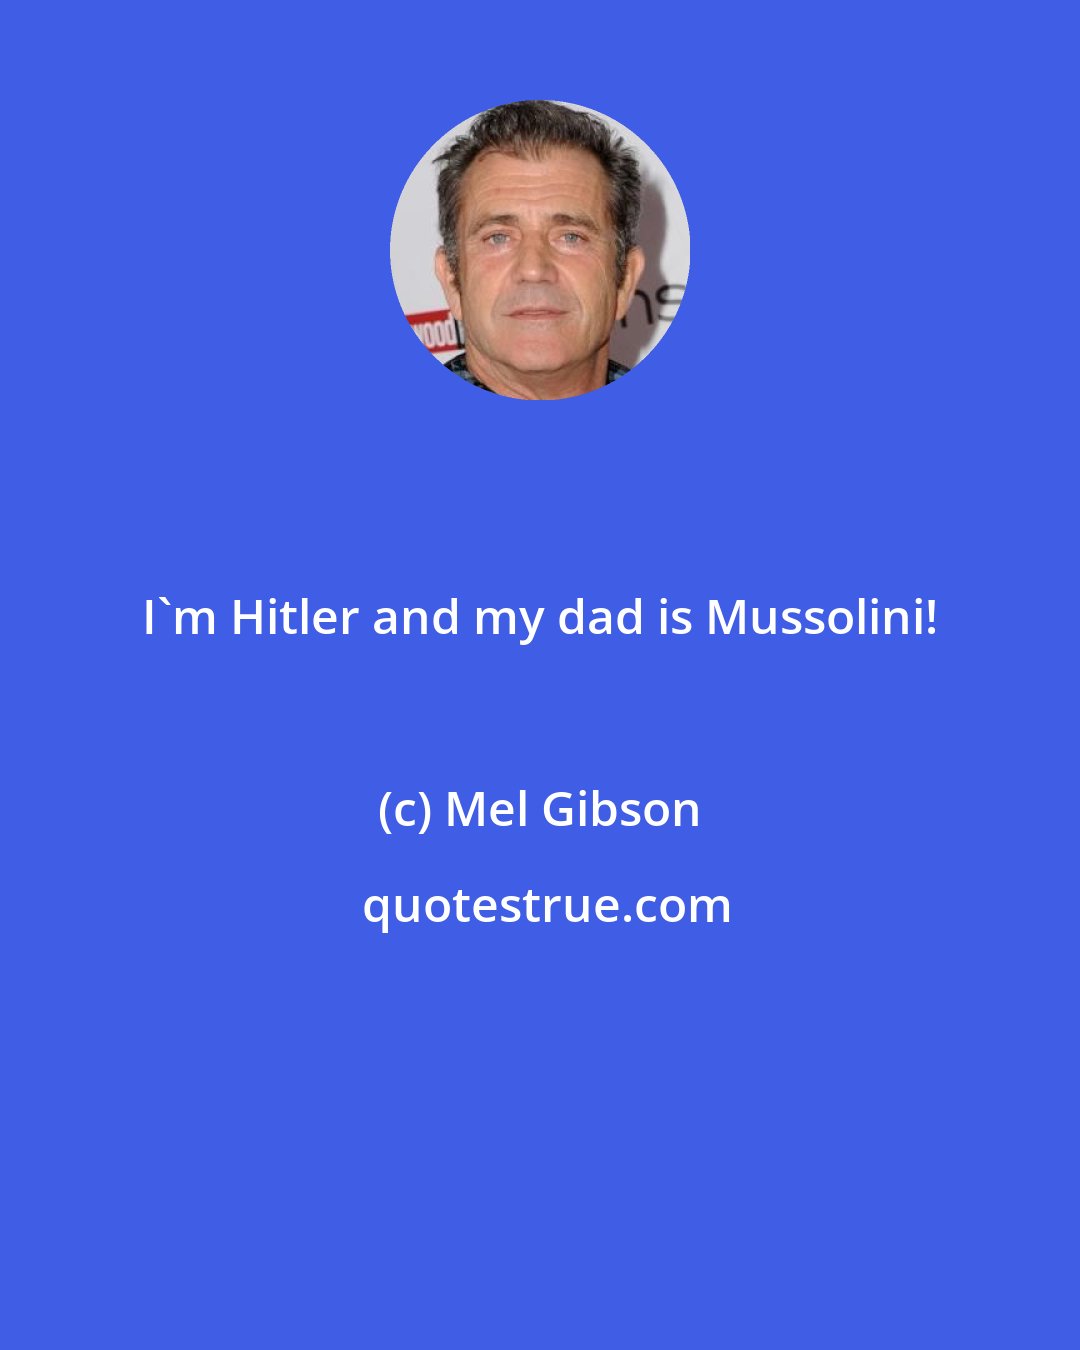 Mel Gibson: I'm Hitler and my dad is Mussolini!